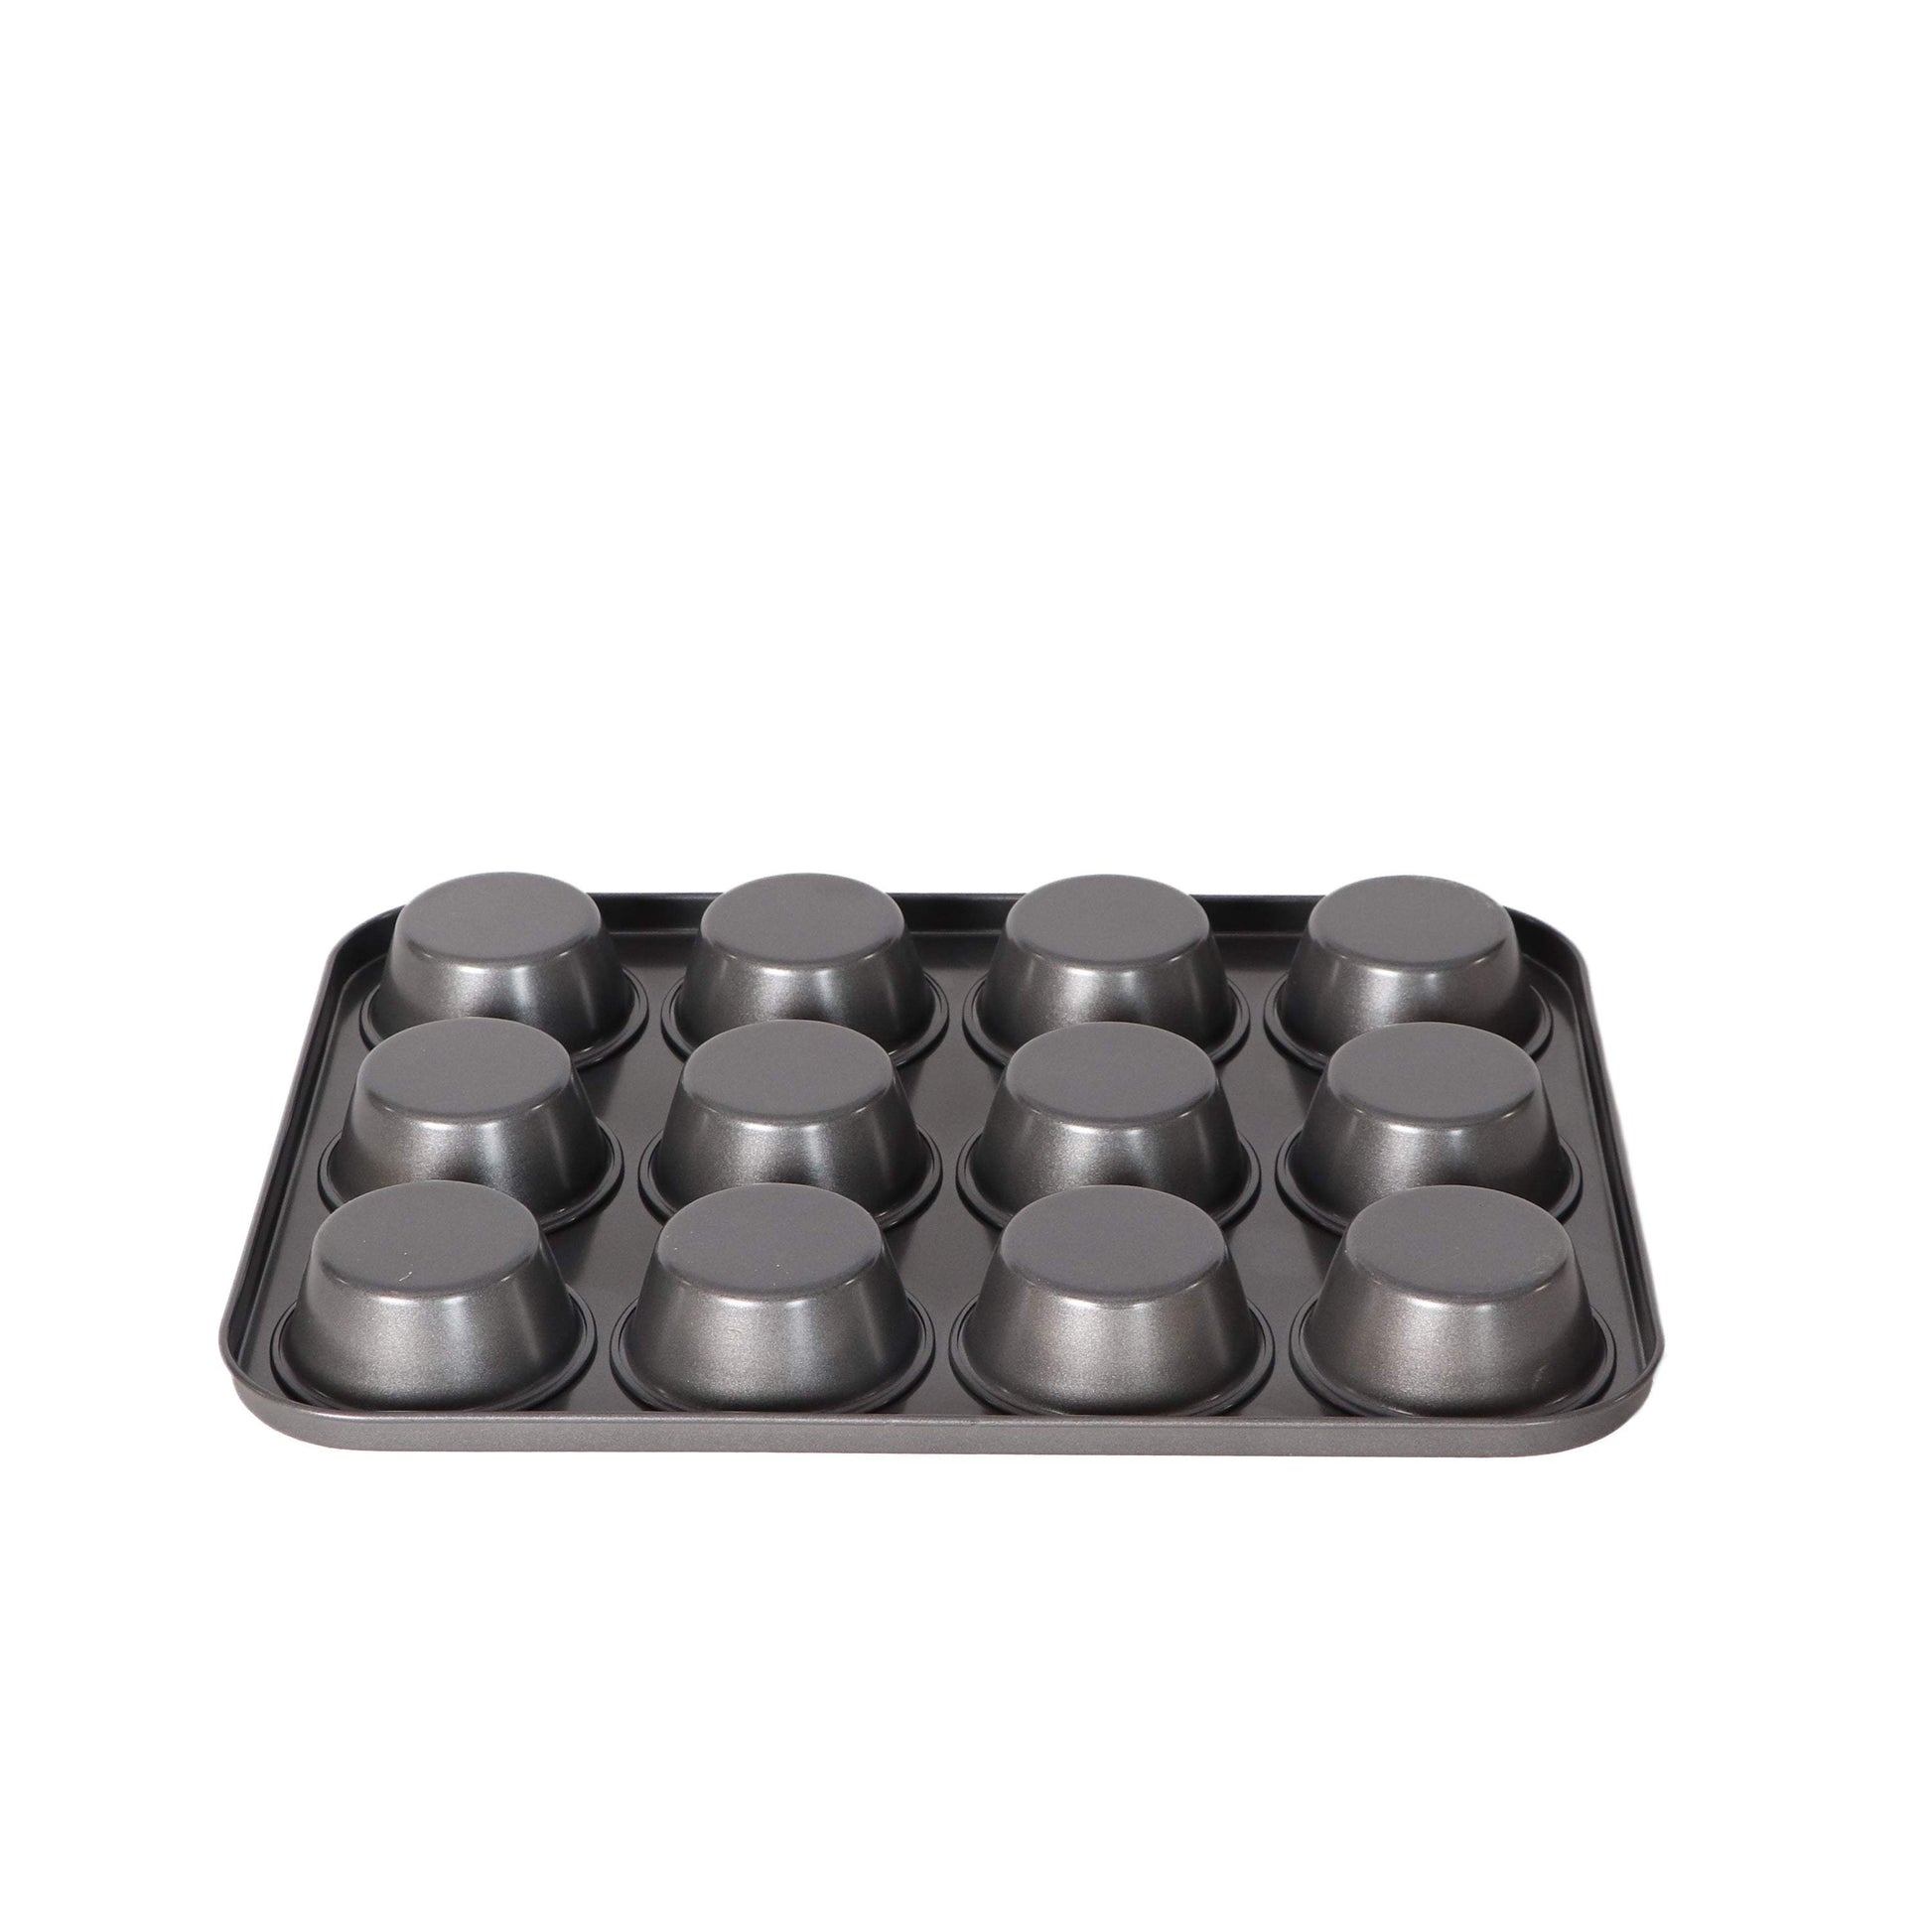 Bergner 12-Cup Oven Muffin & Cupcake Pan Steel-Royal Brands Co-